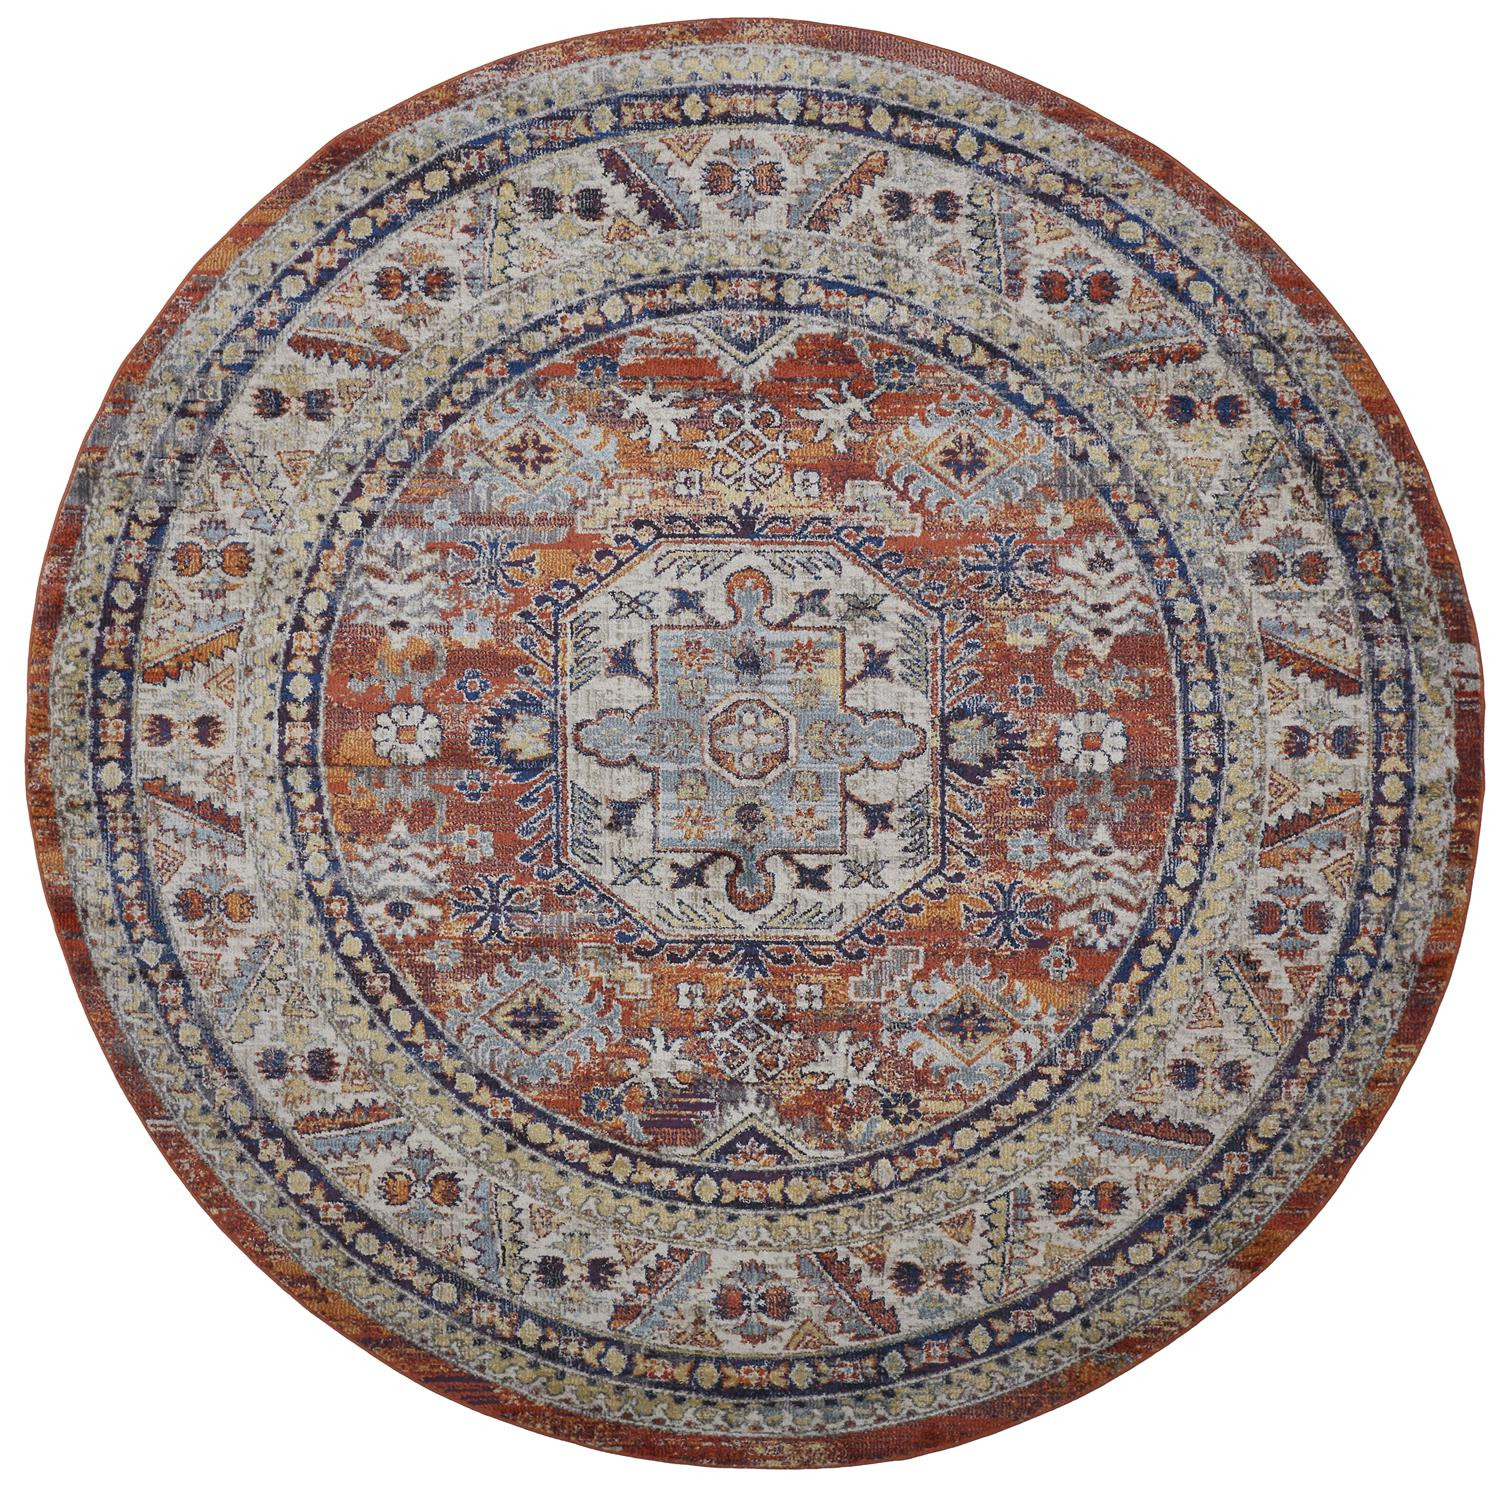 8' Red Orange And Ivory Round Floral Stain Resistant Area Rug-513791-1